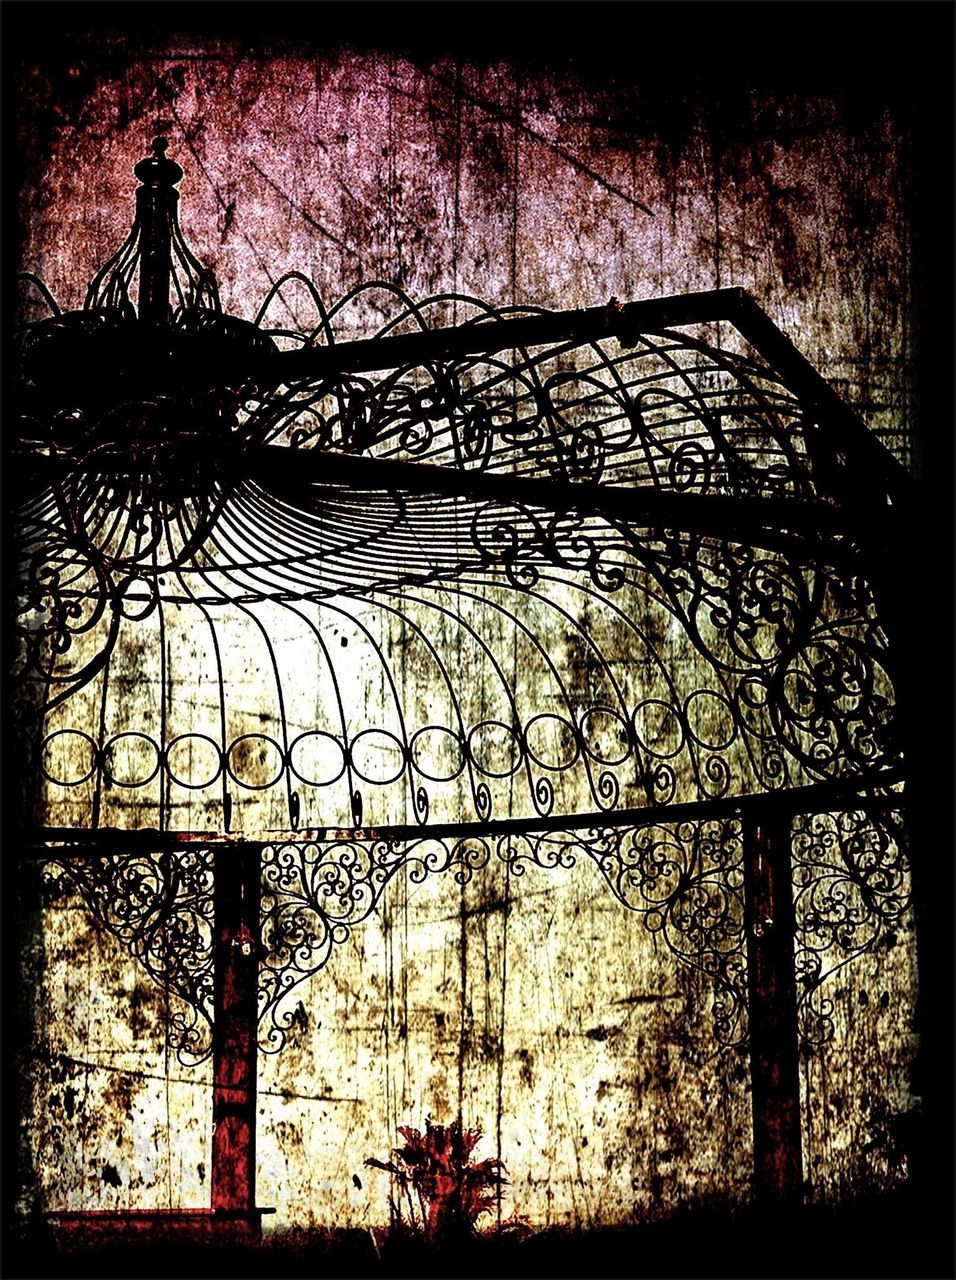 transfer print, auto post production filter, built structure, silhouette, tree, protection, fence, bare tree, architecture, safety, sky, gate, metal, security, branch, chainlink fence, indoors, closed, no people, low angle view